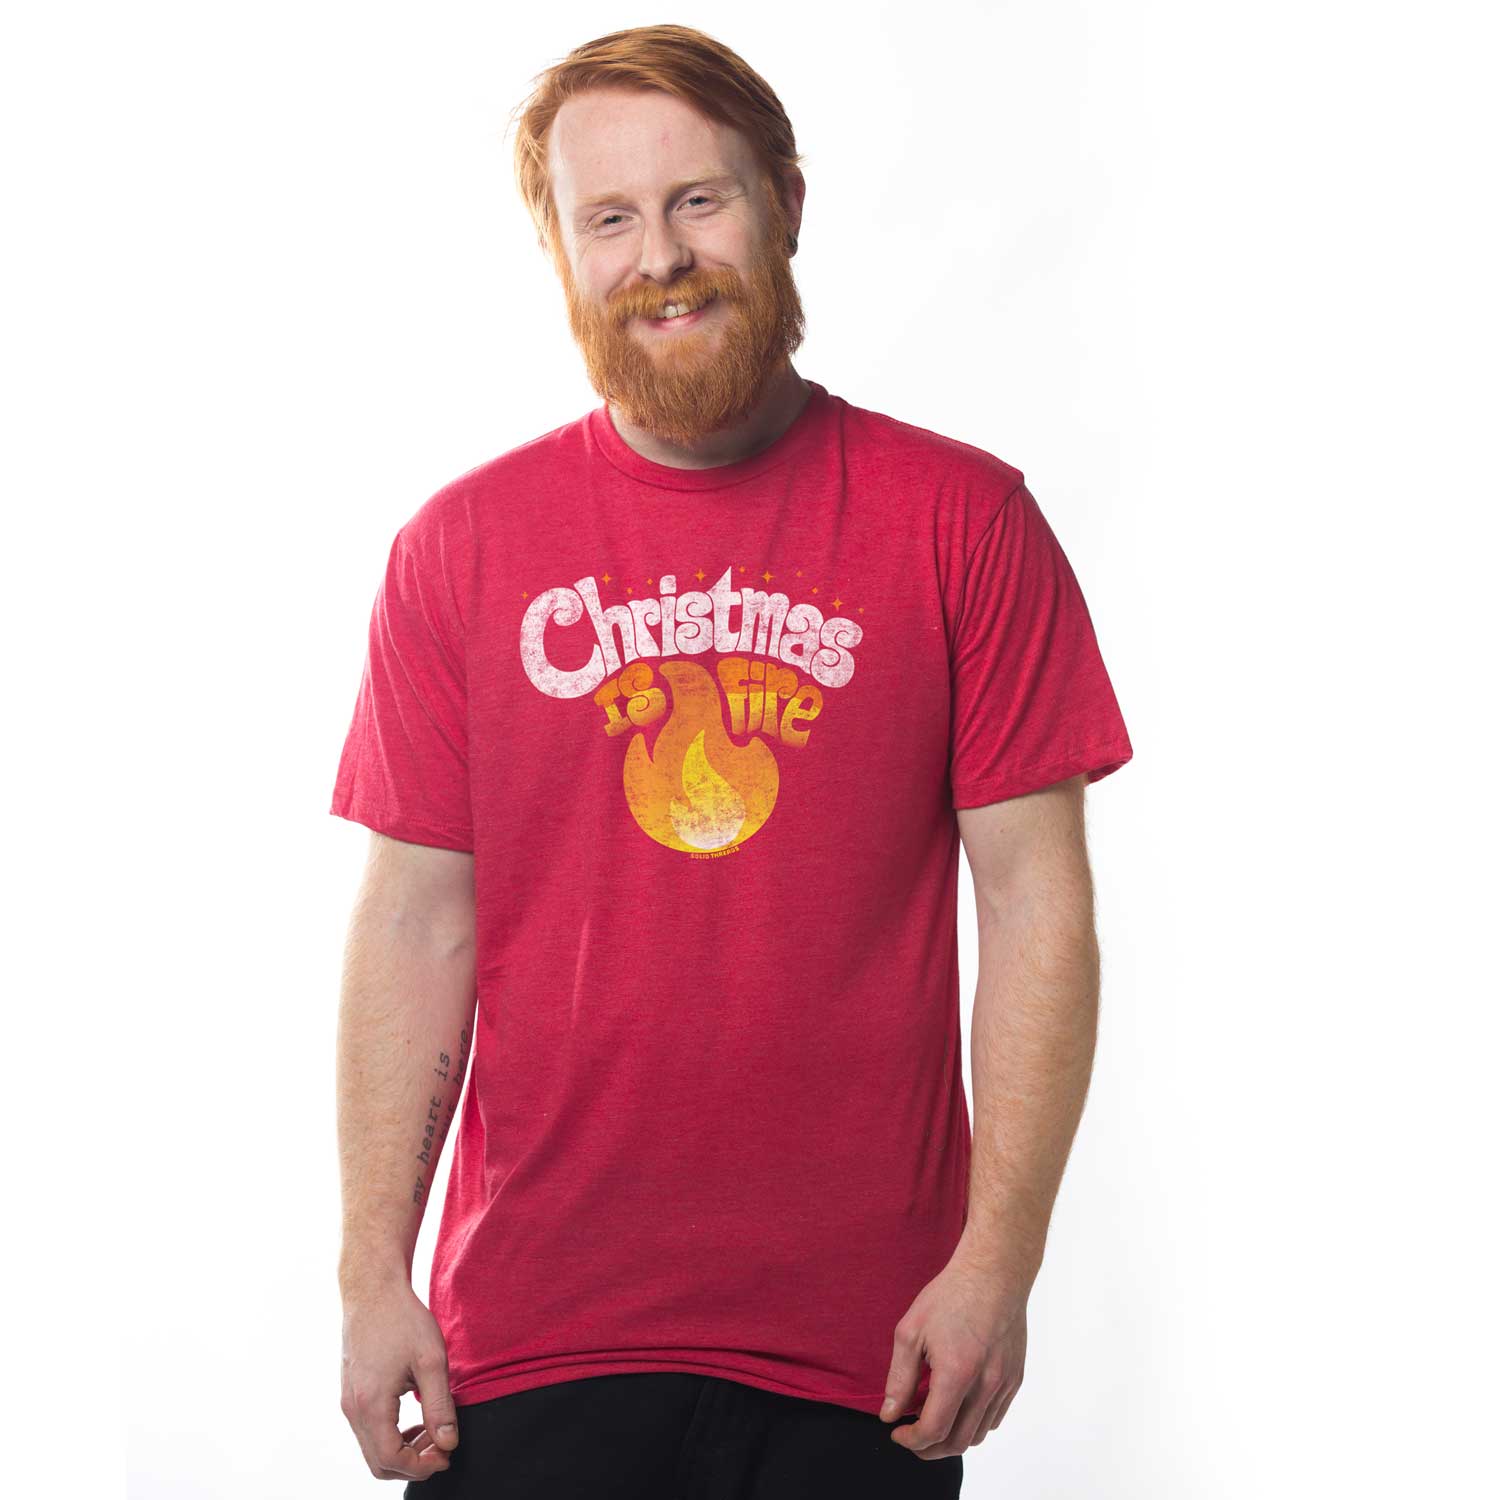 Men's Christmas is Fire Vintage Graphic Tee | Funny Holiday Cheer T-Shirt on Model | SOLID THREADS